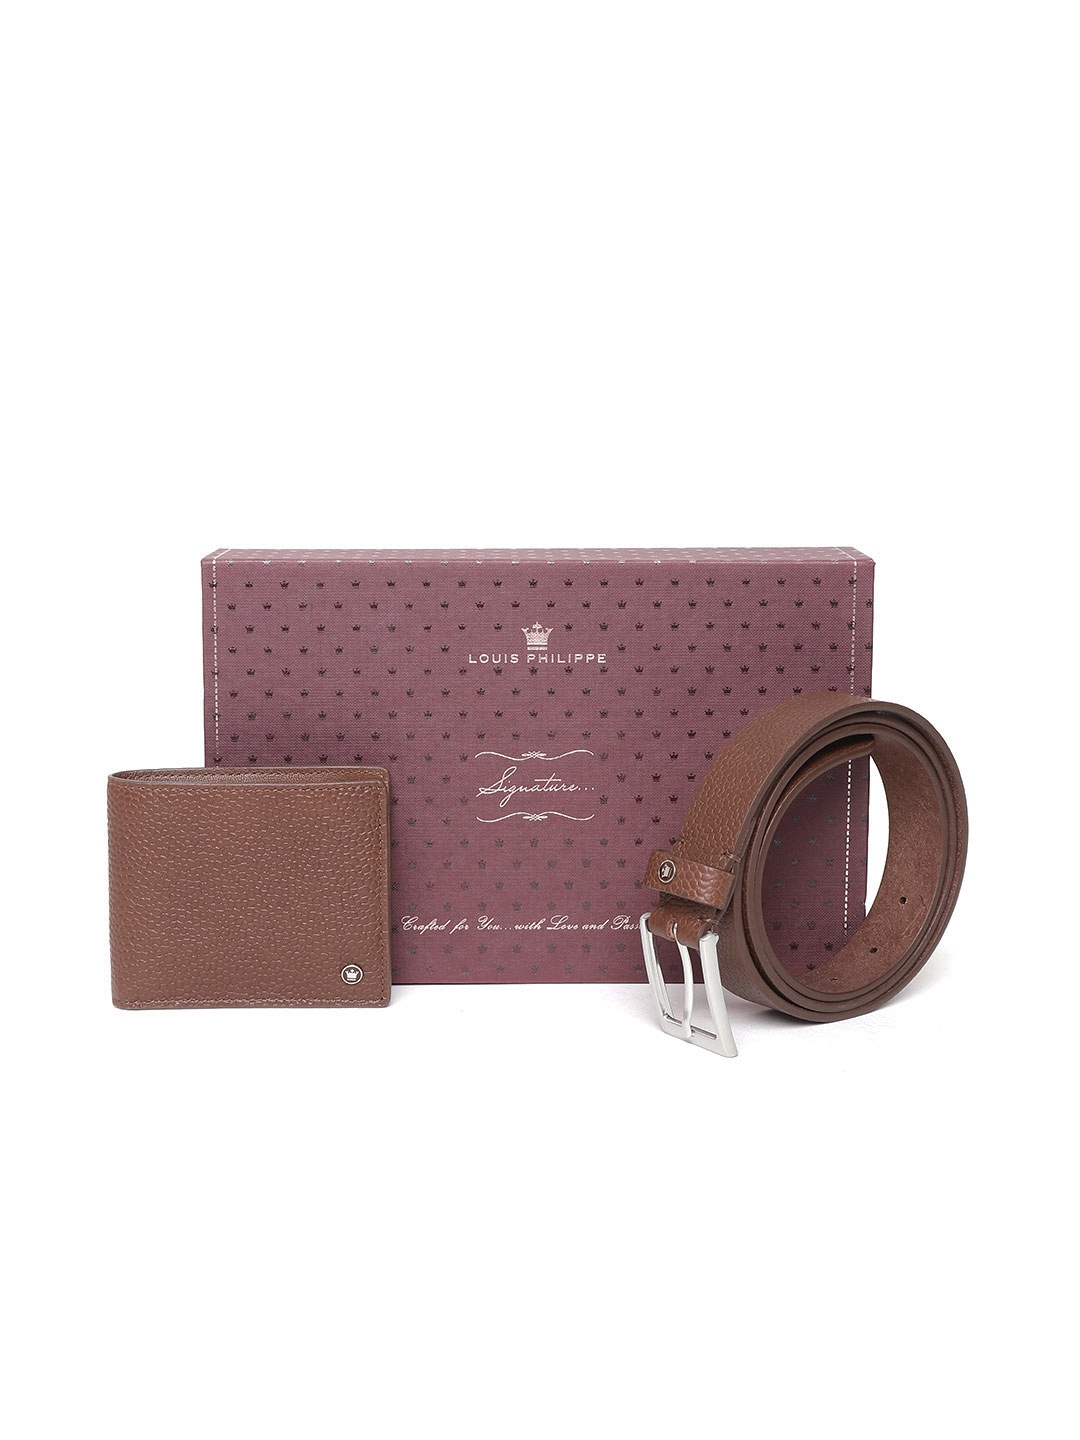 Louis Philippe Accessories, Louis Philippe Brown Signature Wallet